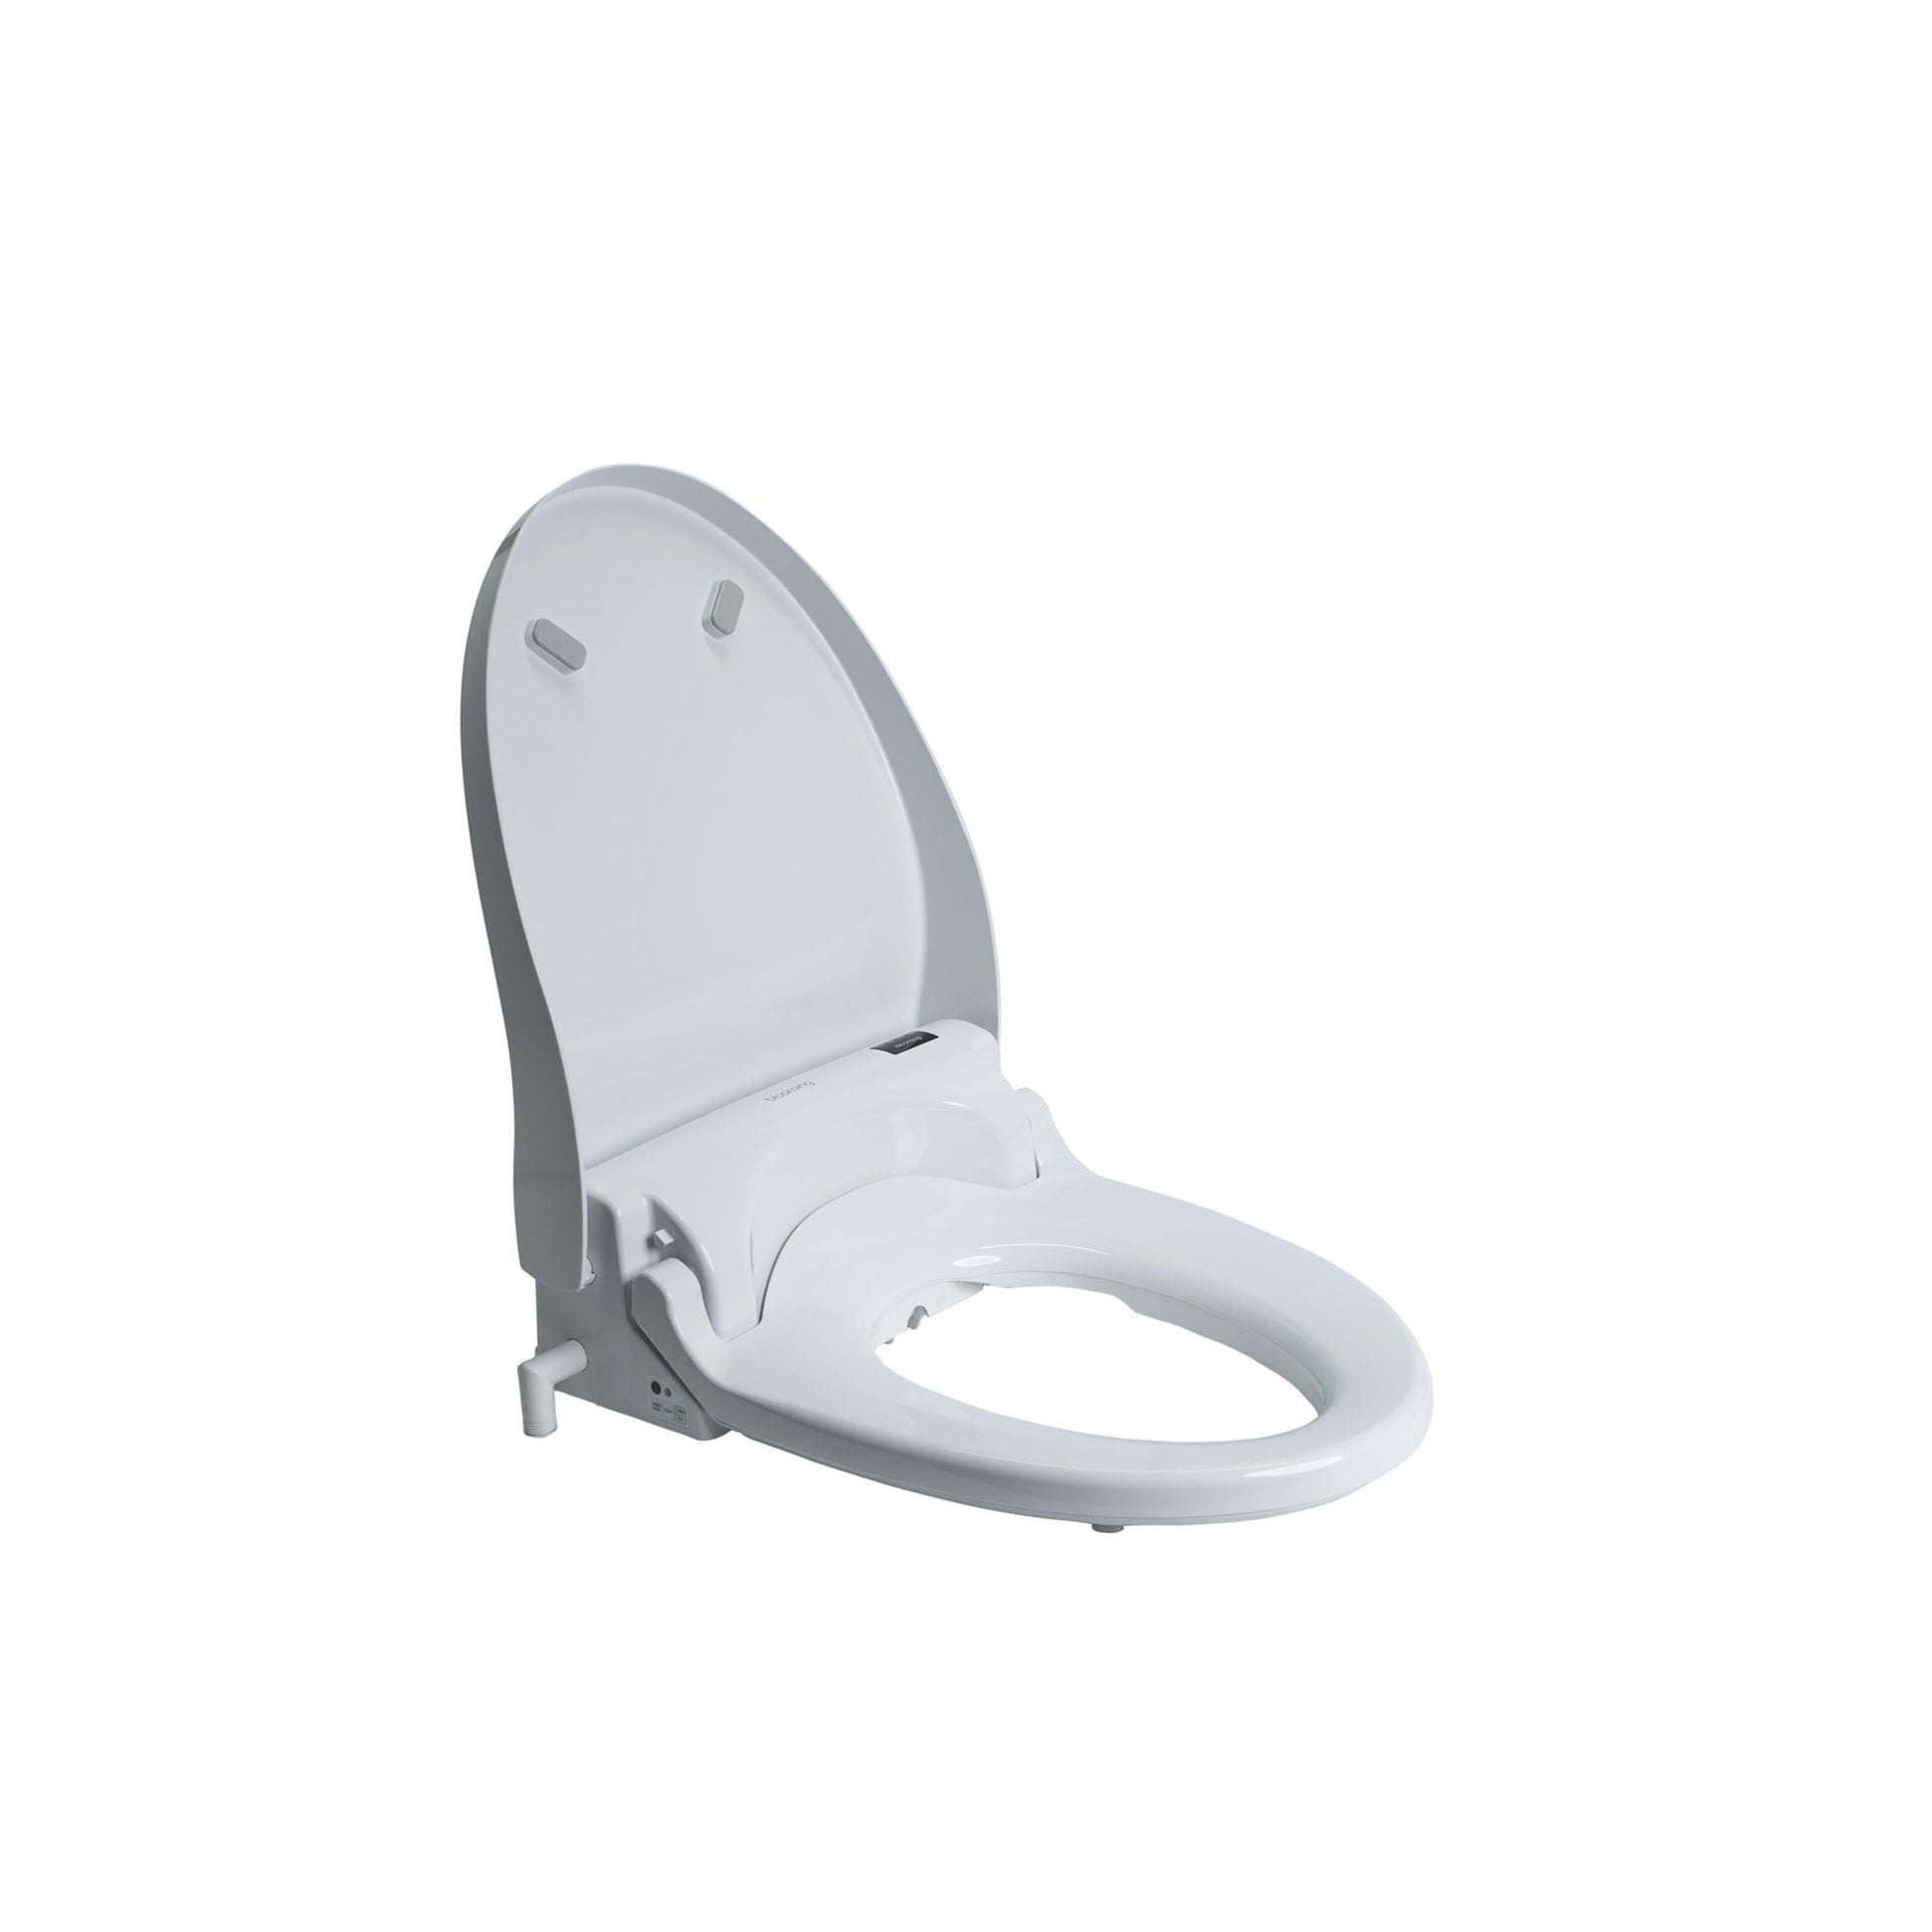 Blooming NB-R1570-EW White Hybrid Heating System Elongated Bidet Seat With Remote Control and Self-Opening Sittable Lid